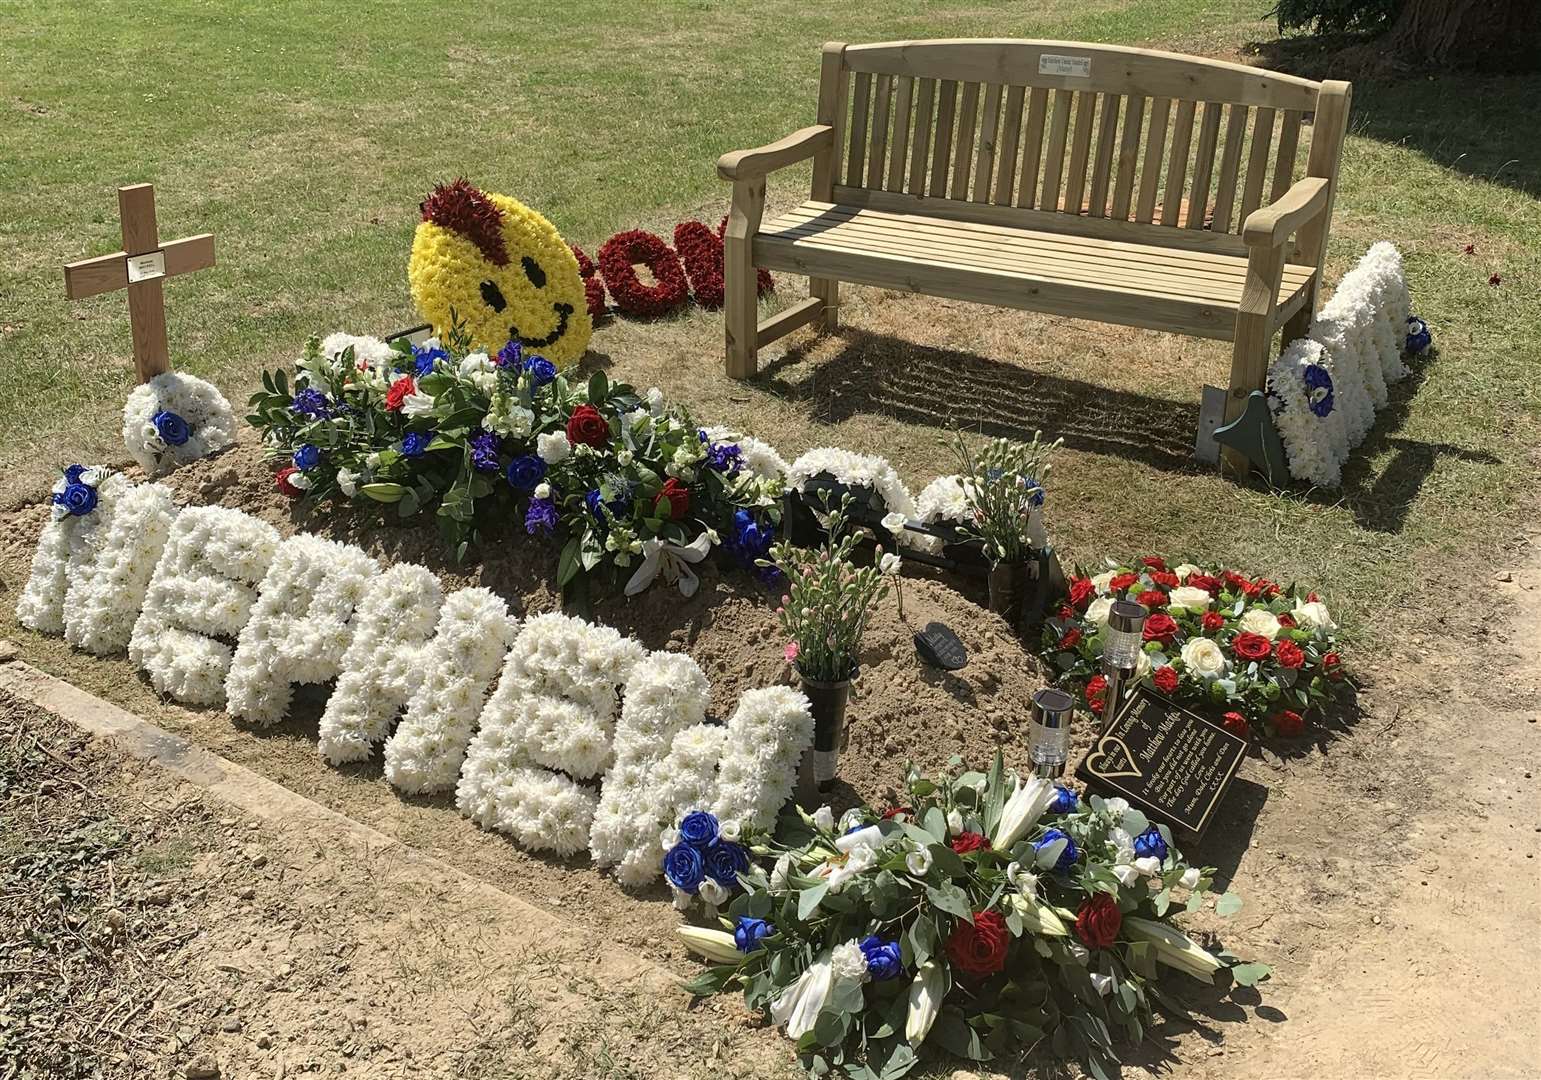 Matthew was laid to rest at the Kent and Sussex Crematorium in Tunbridge Wells on June 22